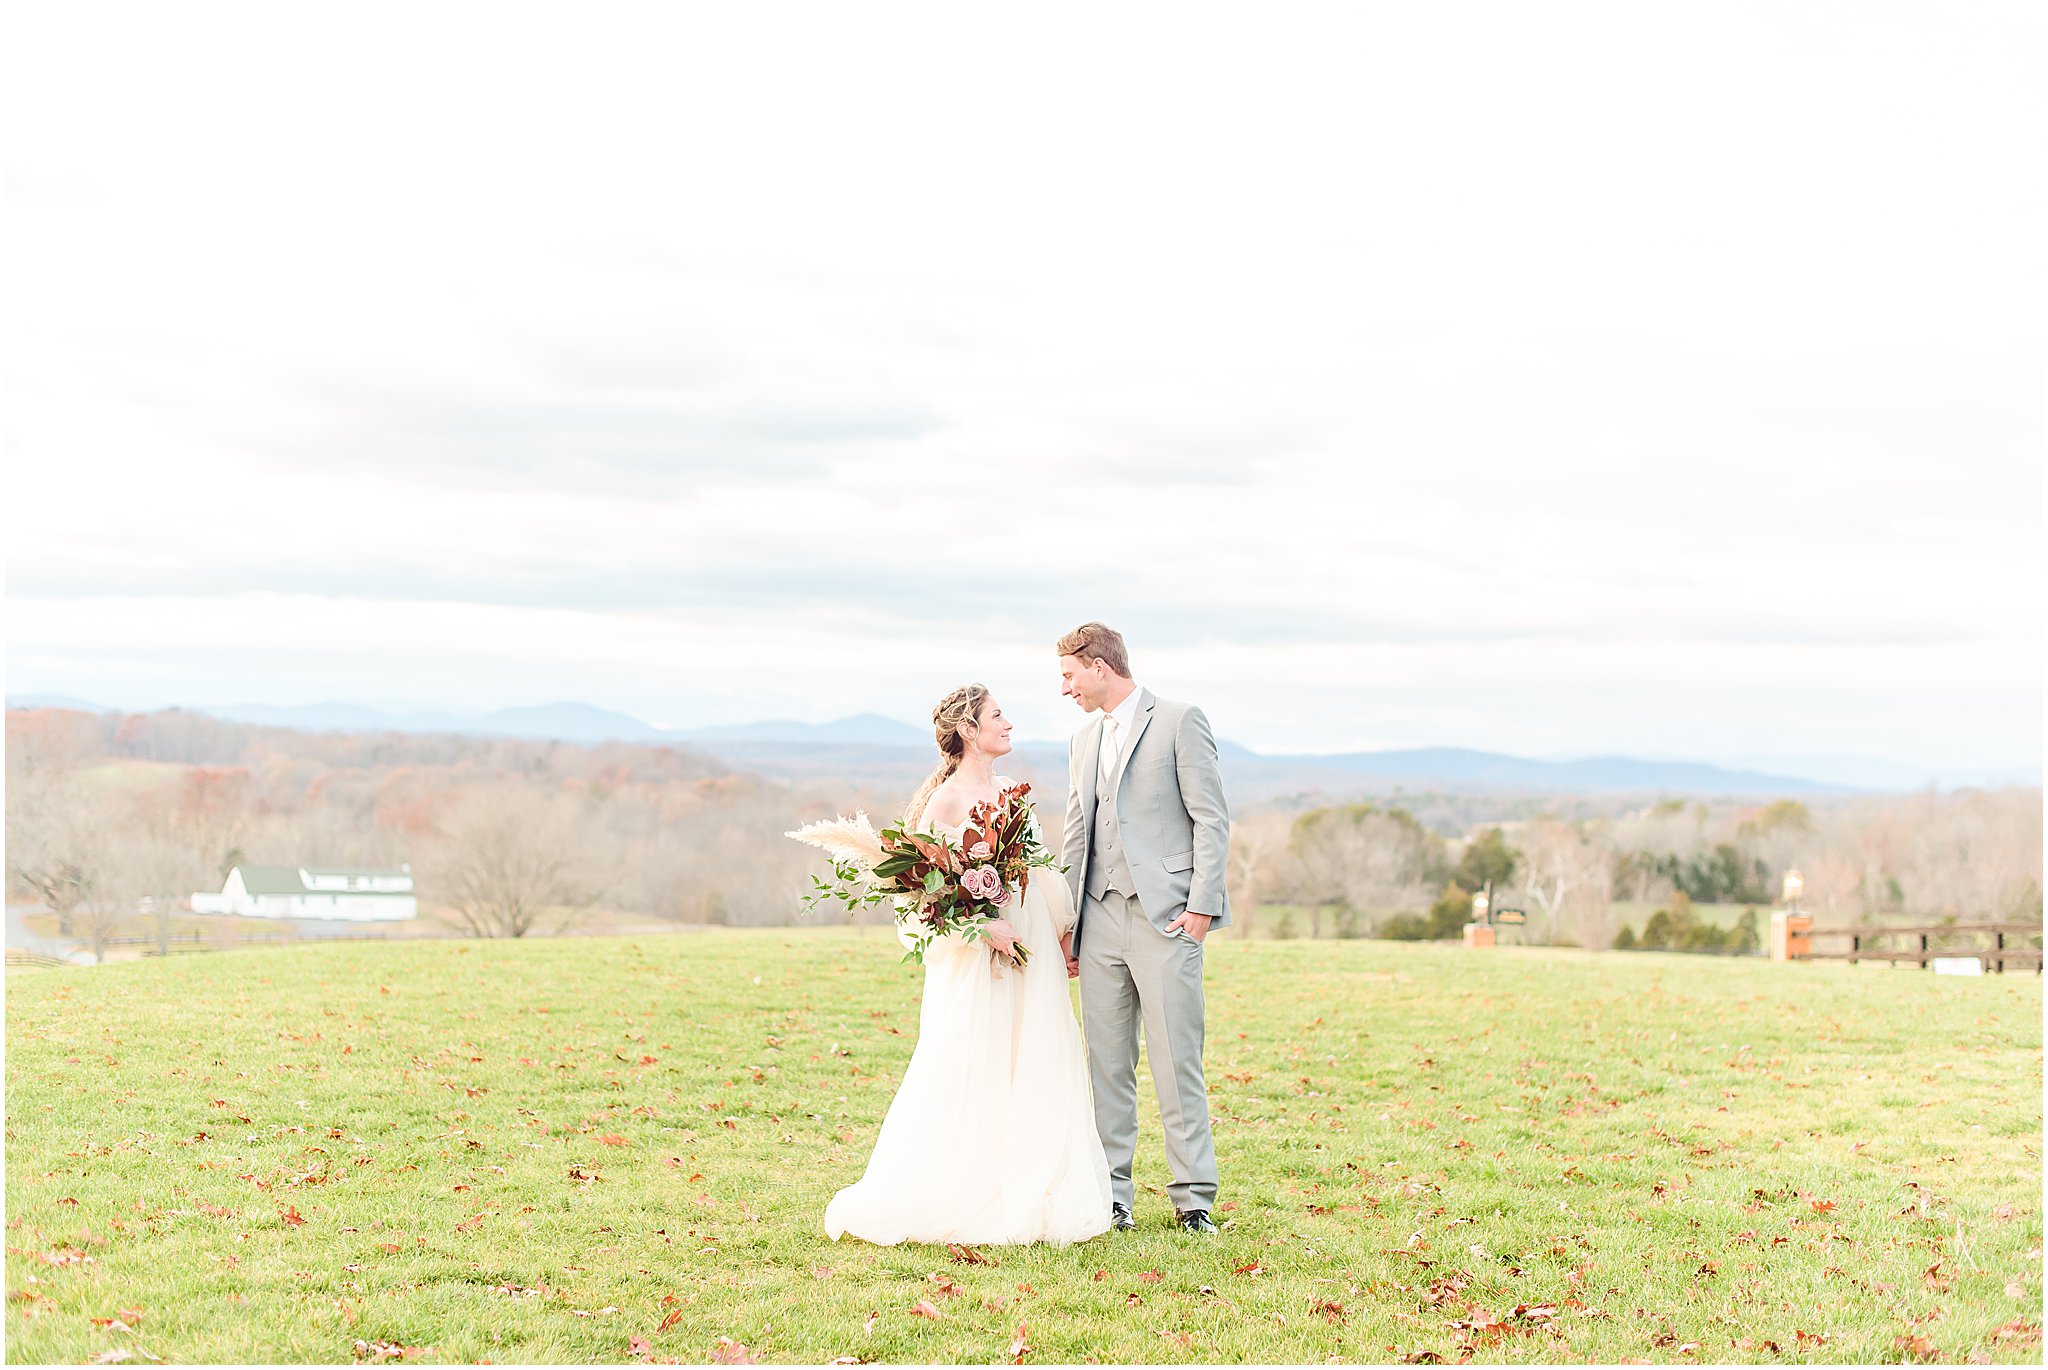 Bride and groom smiling at each other with mountains in background Mount Ida Farm Wedding